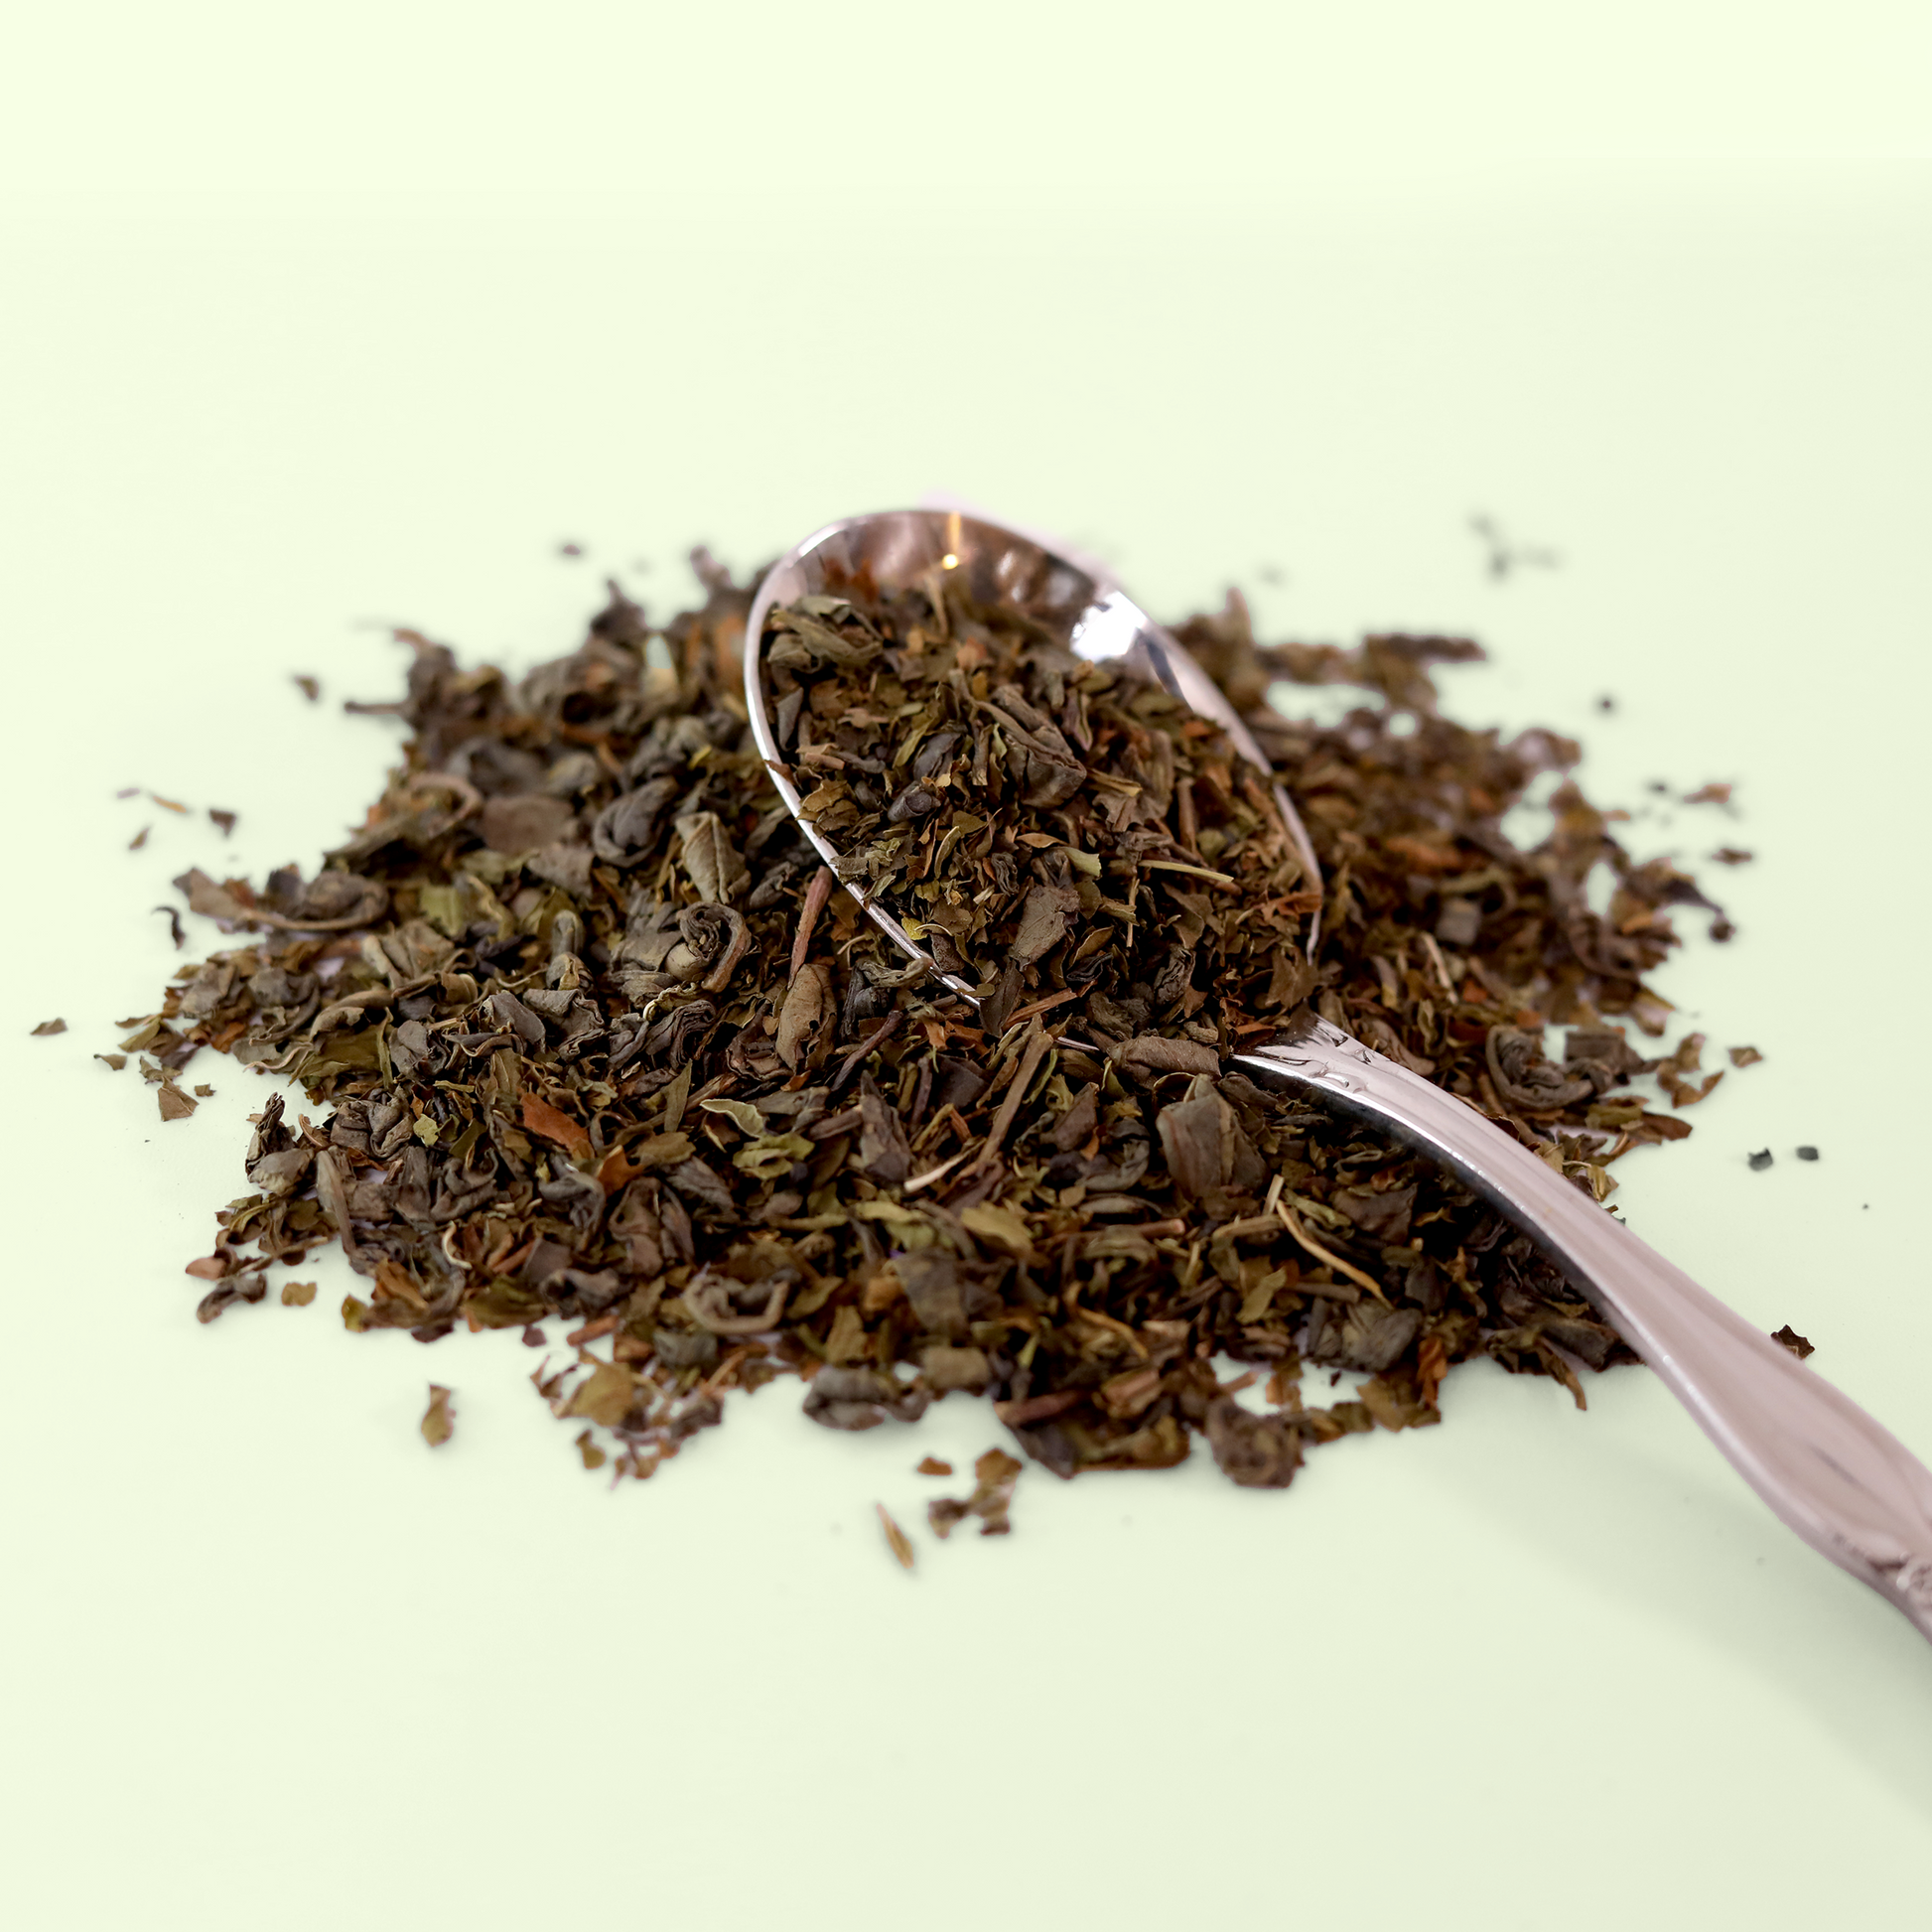  A close-up view of a pile of dried Moonlit Mint tea leaves. A metal spoon is visible, scooping up some of the tea blend. A Good Store product.